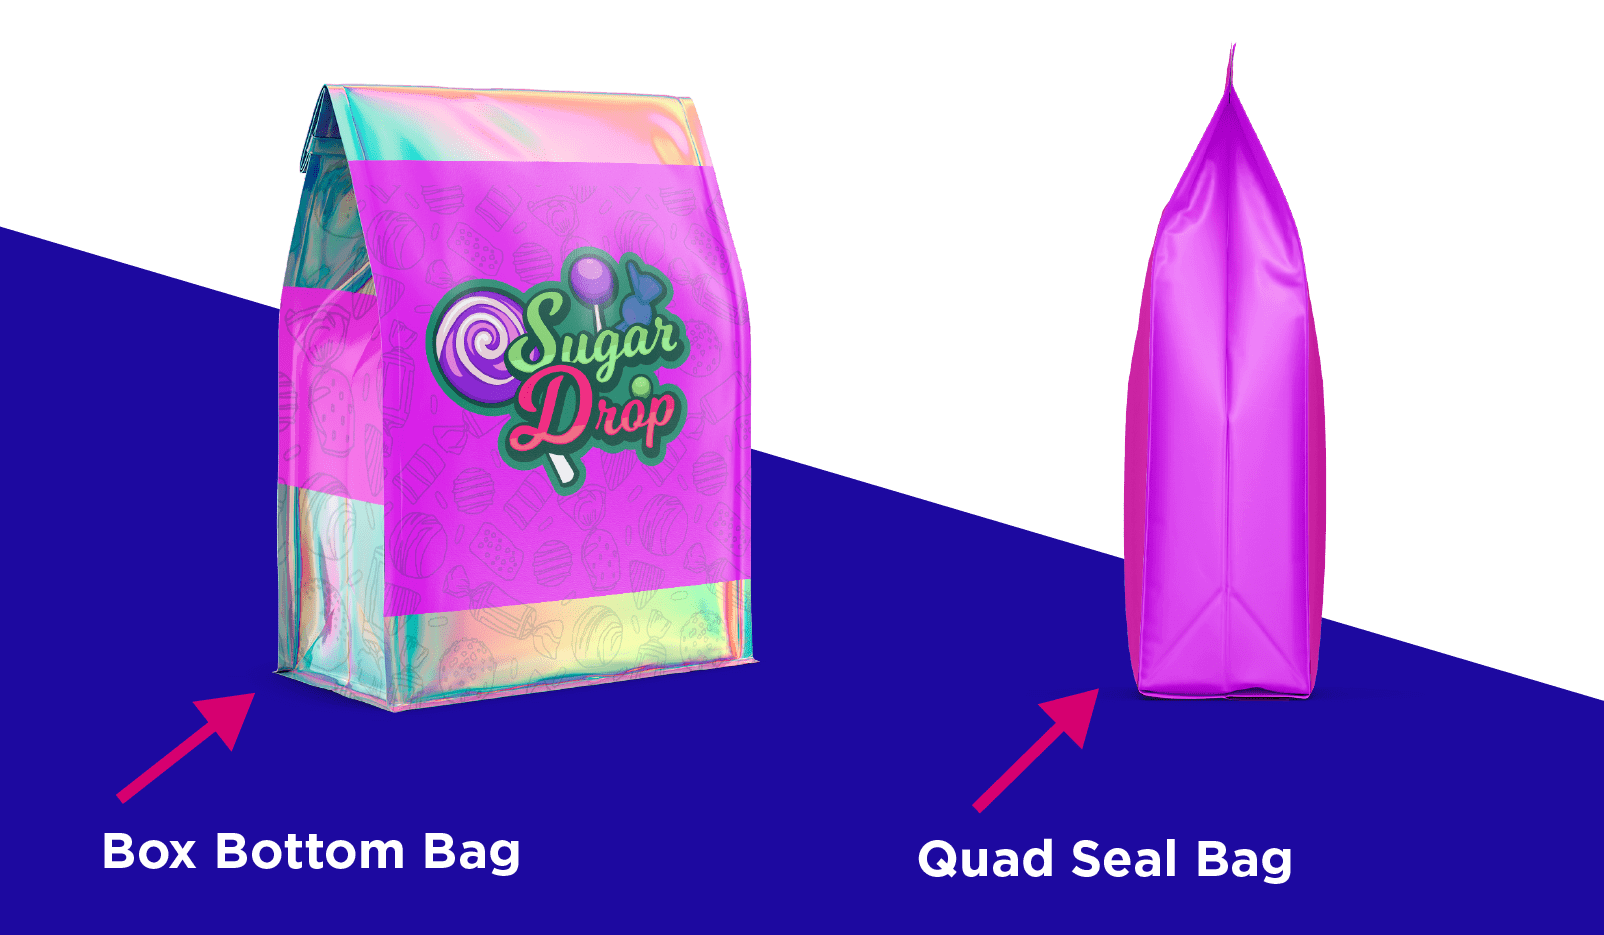 custom quad seal bags Carepac offers including box bottom bag or quad seal bag best for coffee packaging